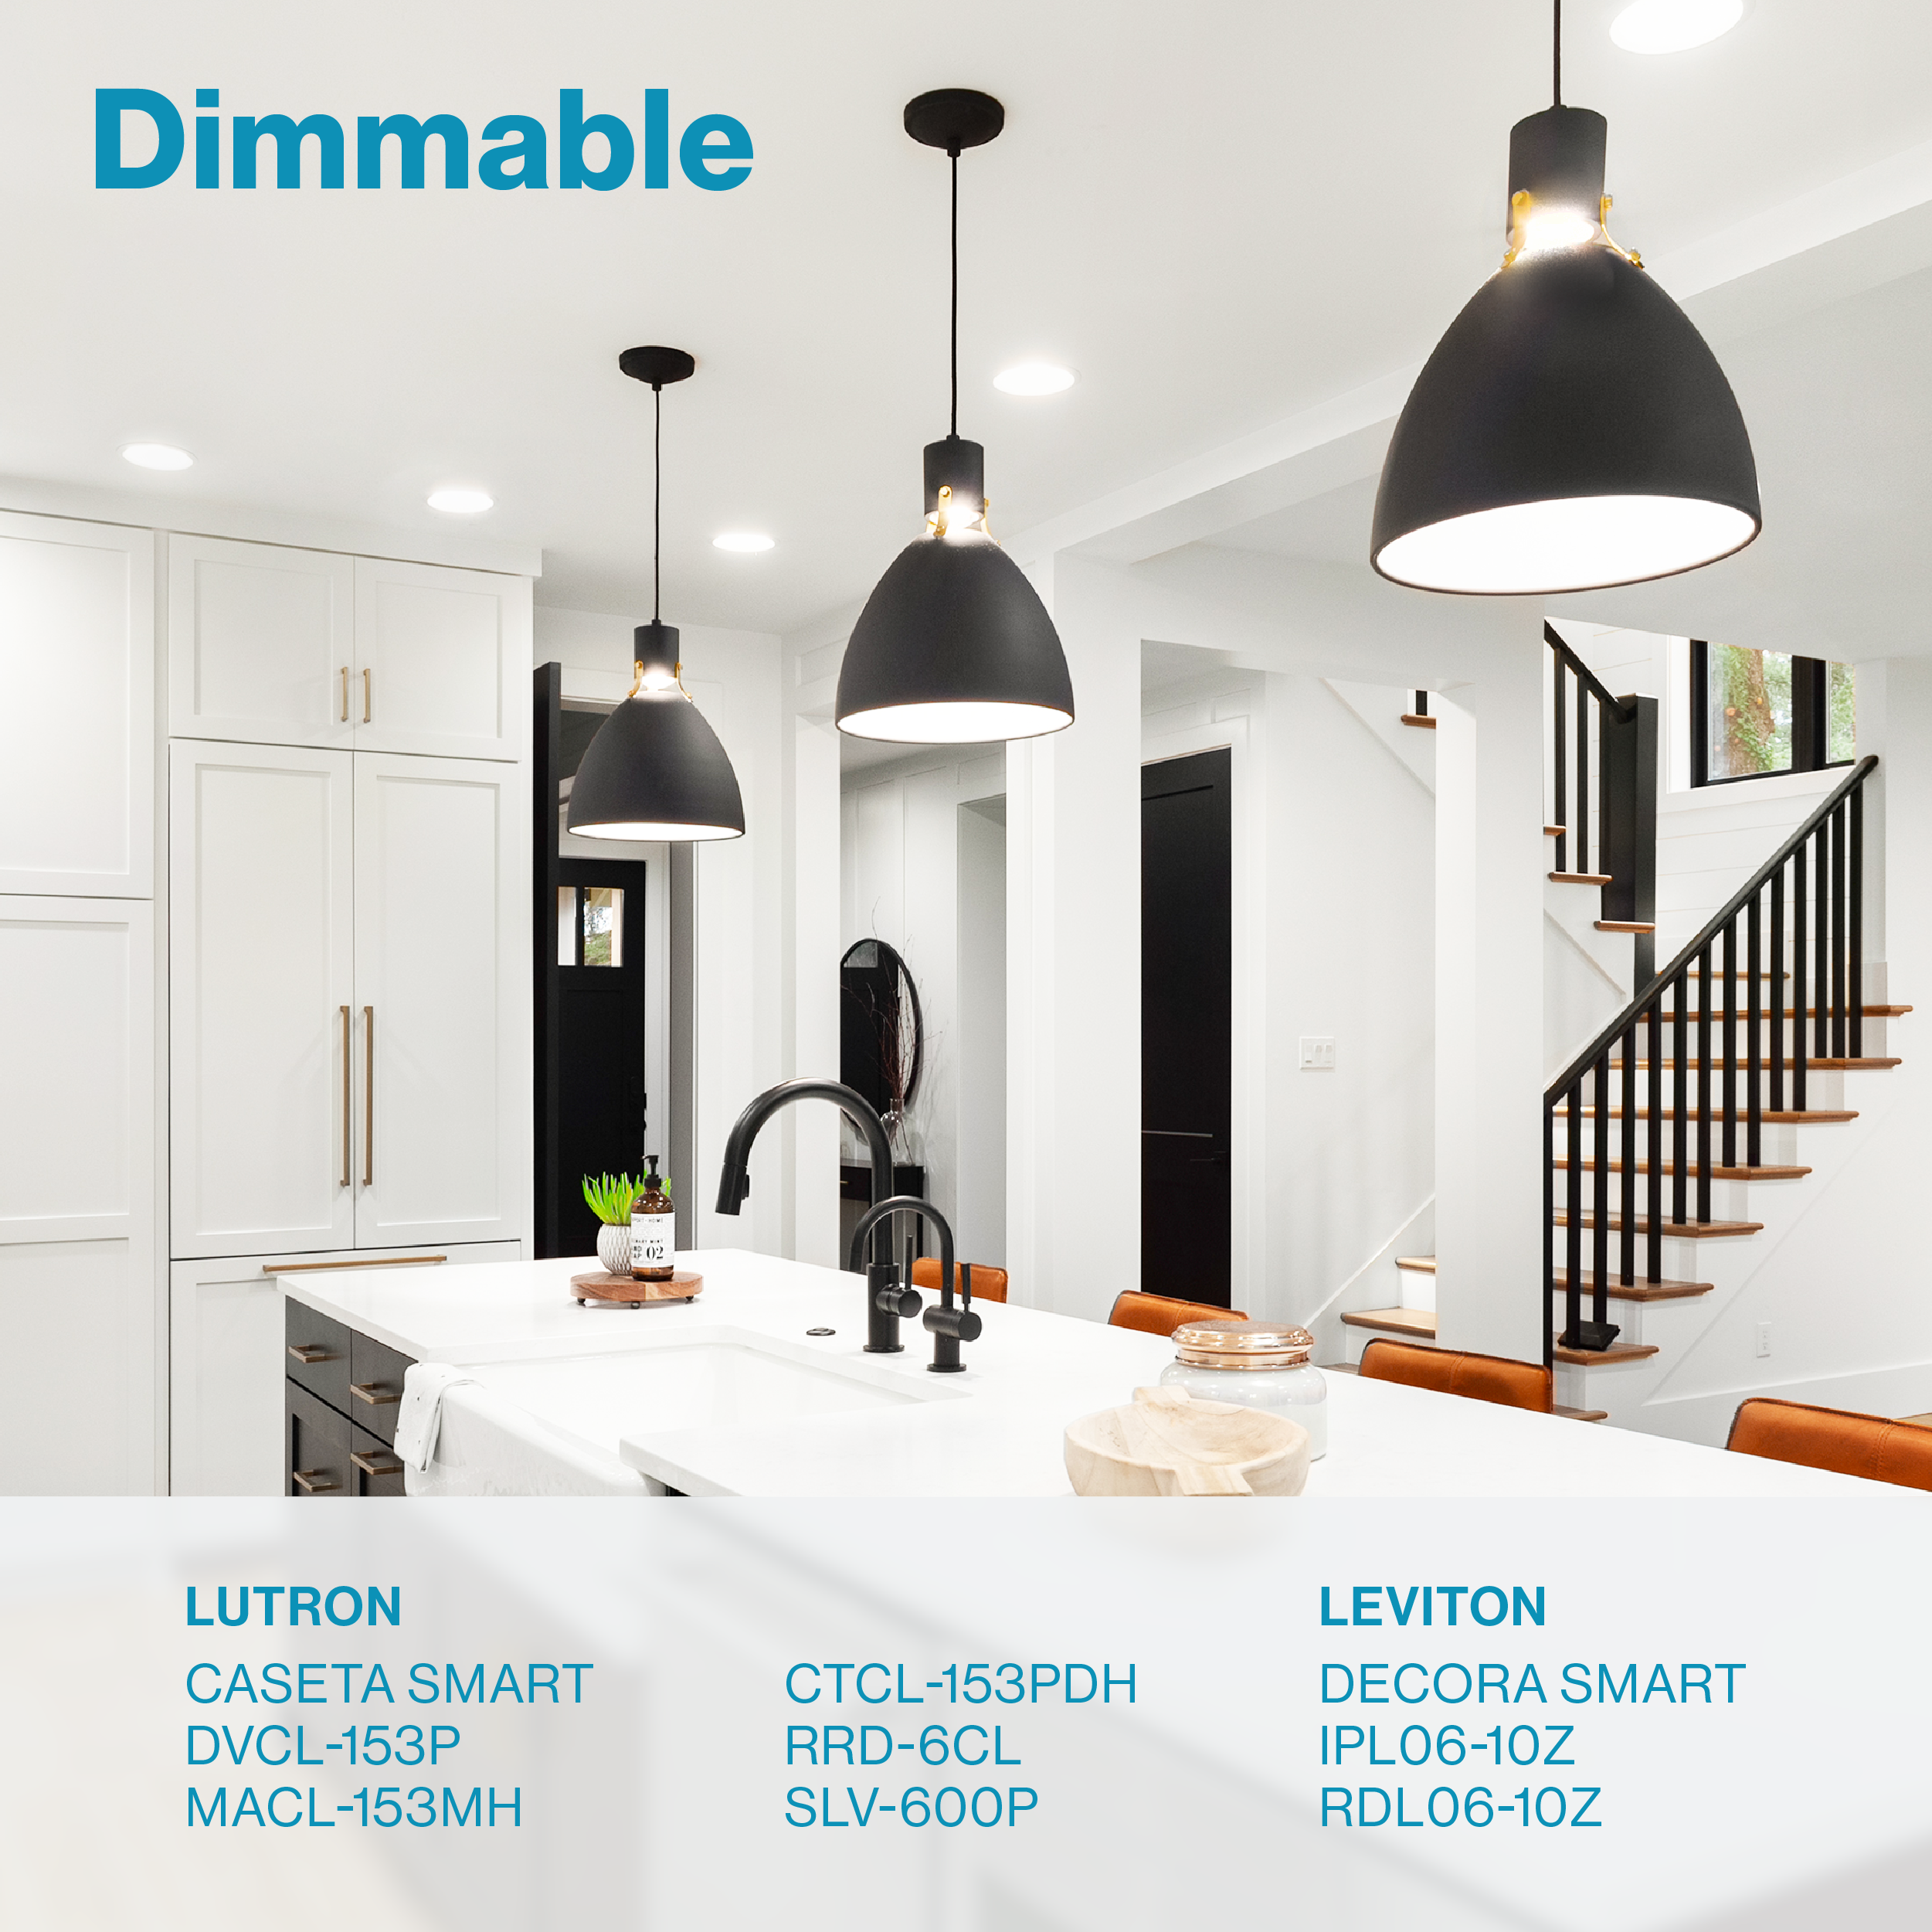 Dimmable BR30 Sunco LED lightbulb for pendant lamps and recessed can ceiling lights in kitchen hallway living room